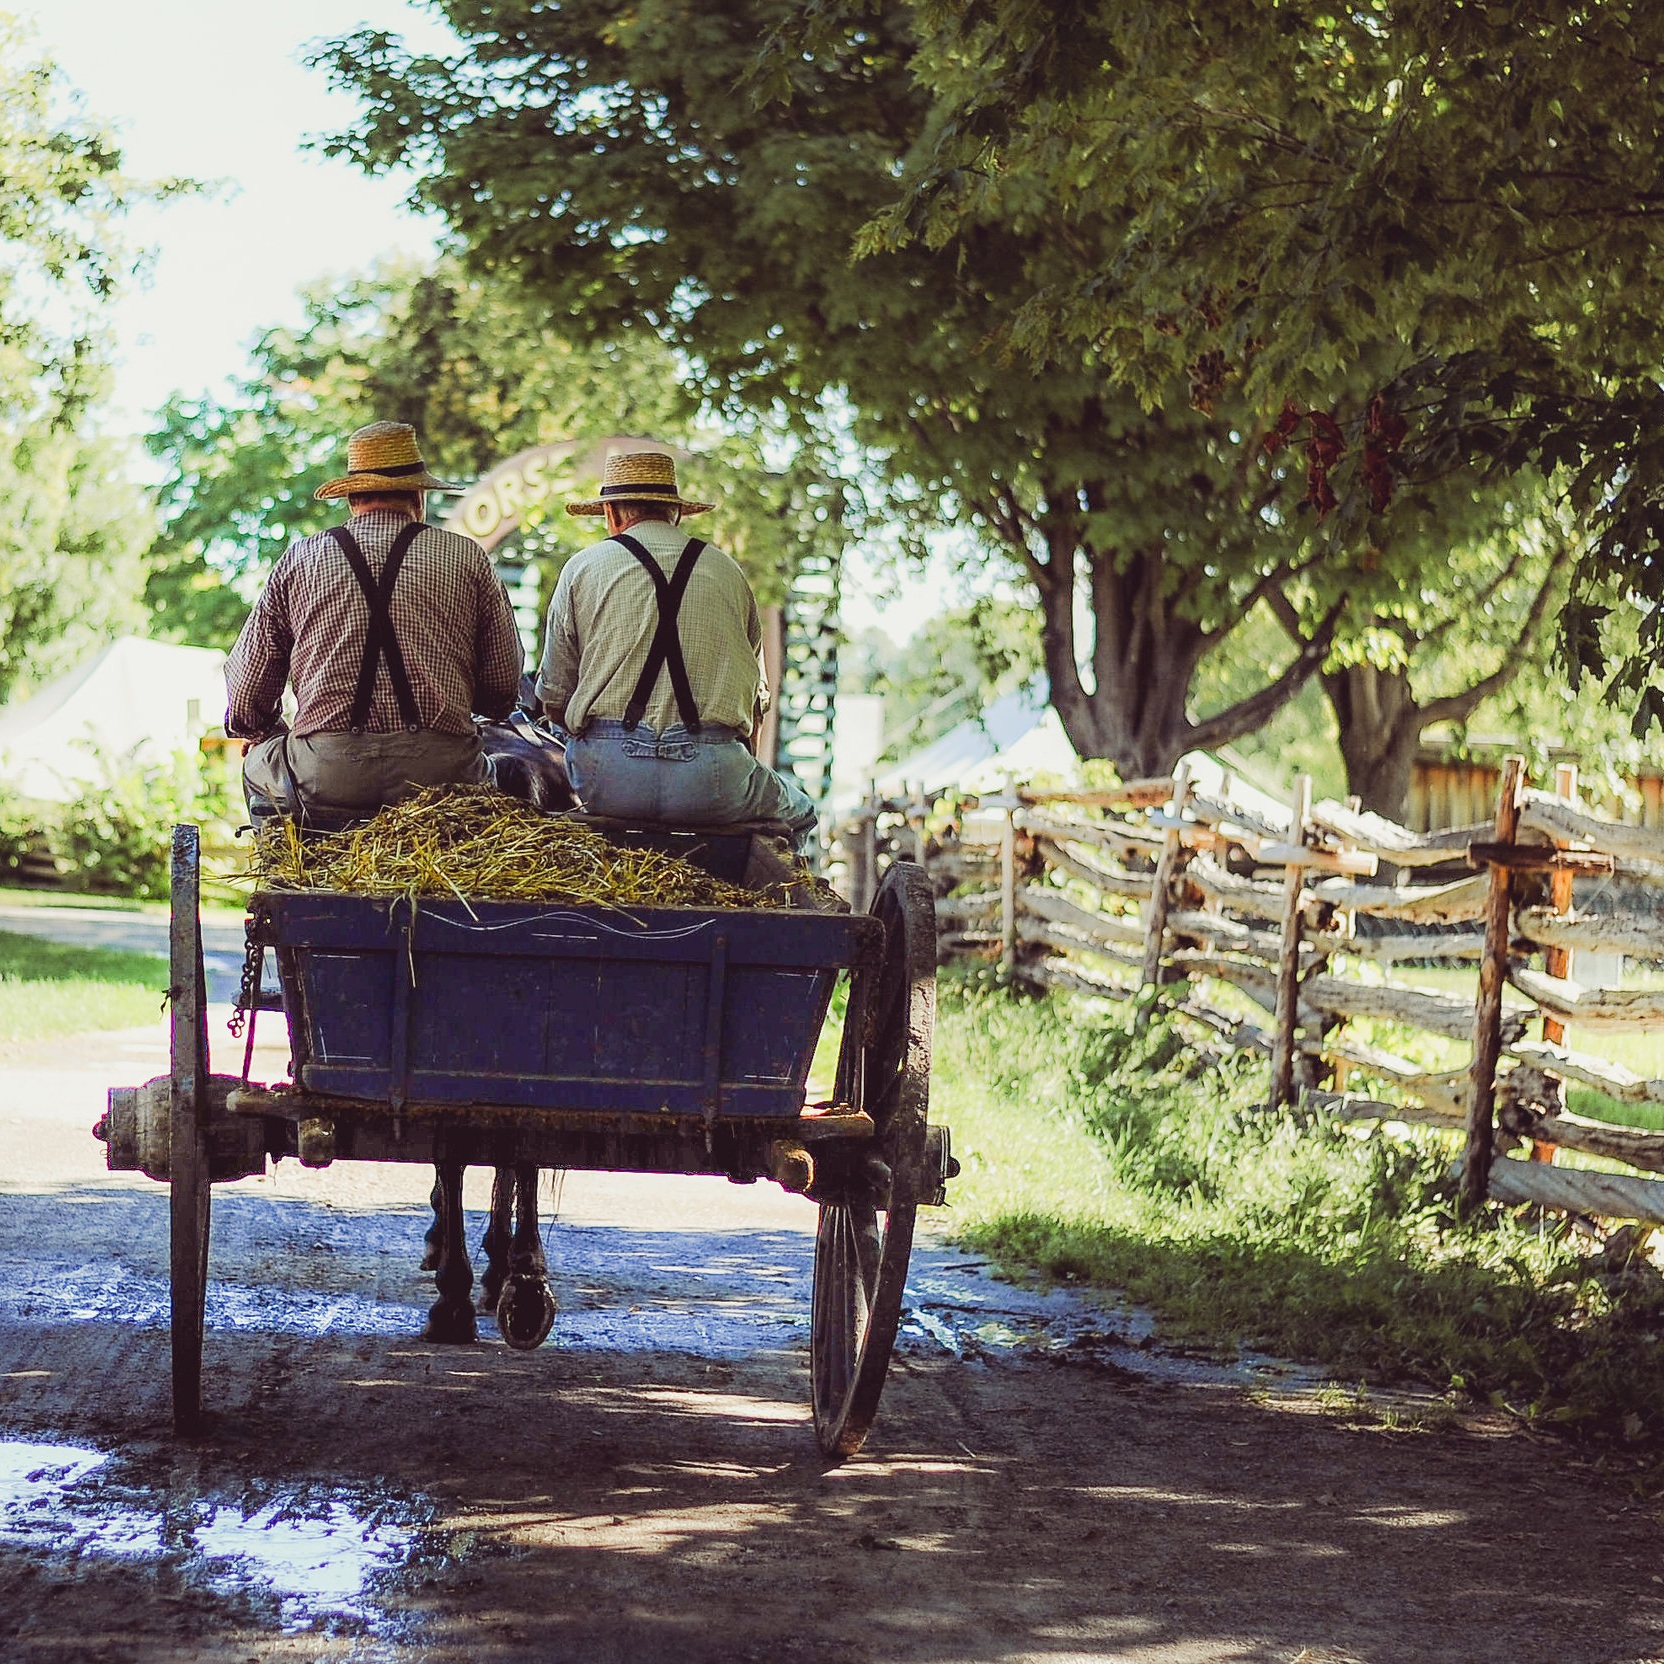 Two men ride a hay wagon down a country road.